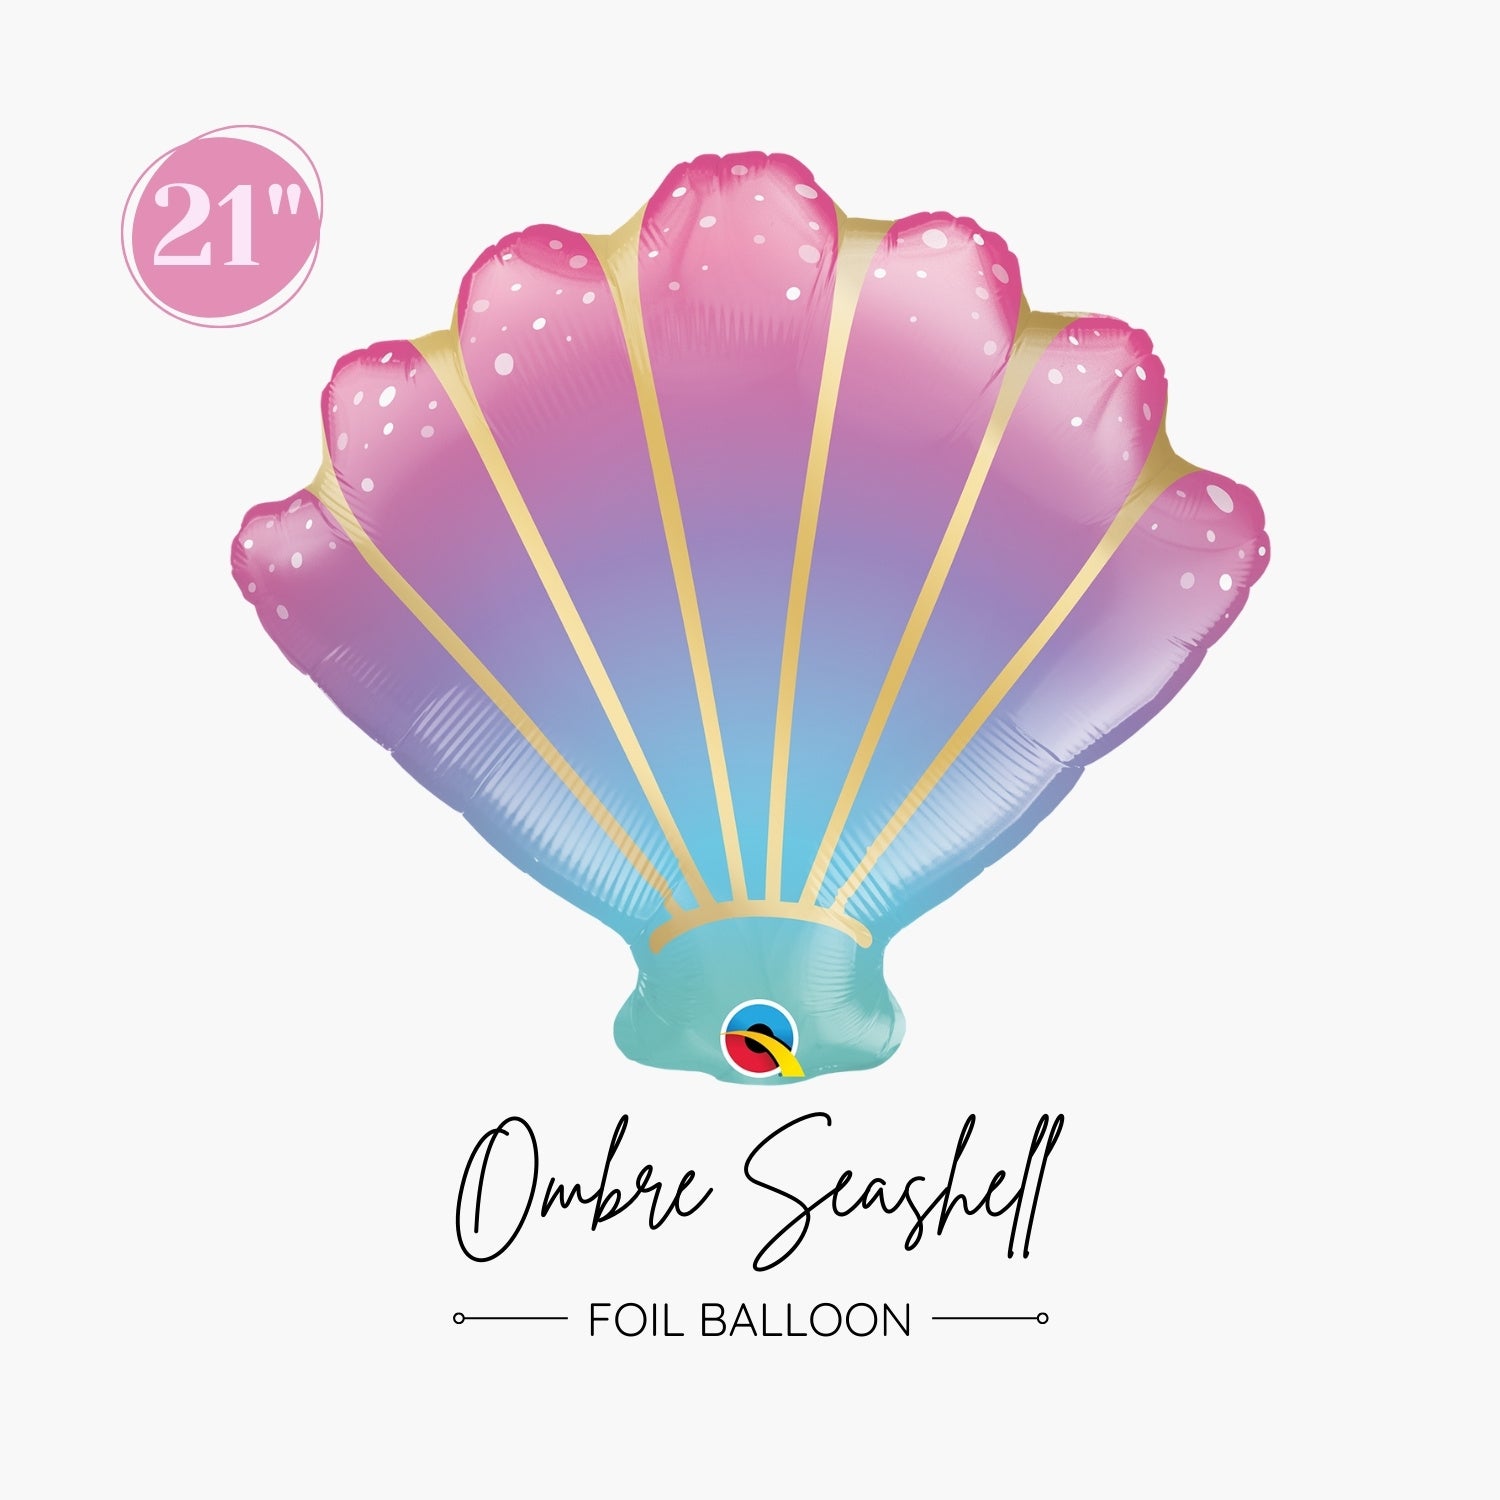 Ombre Seashell Foil Balloon 21" - Mermaid Under the Sea Birthday Party Decorations